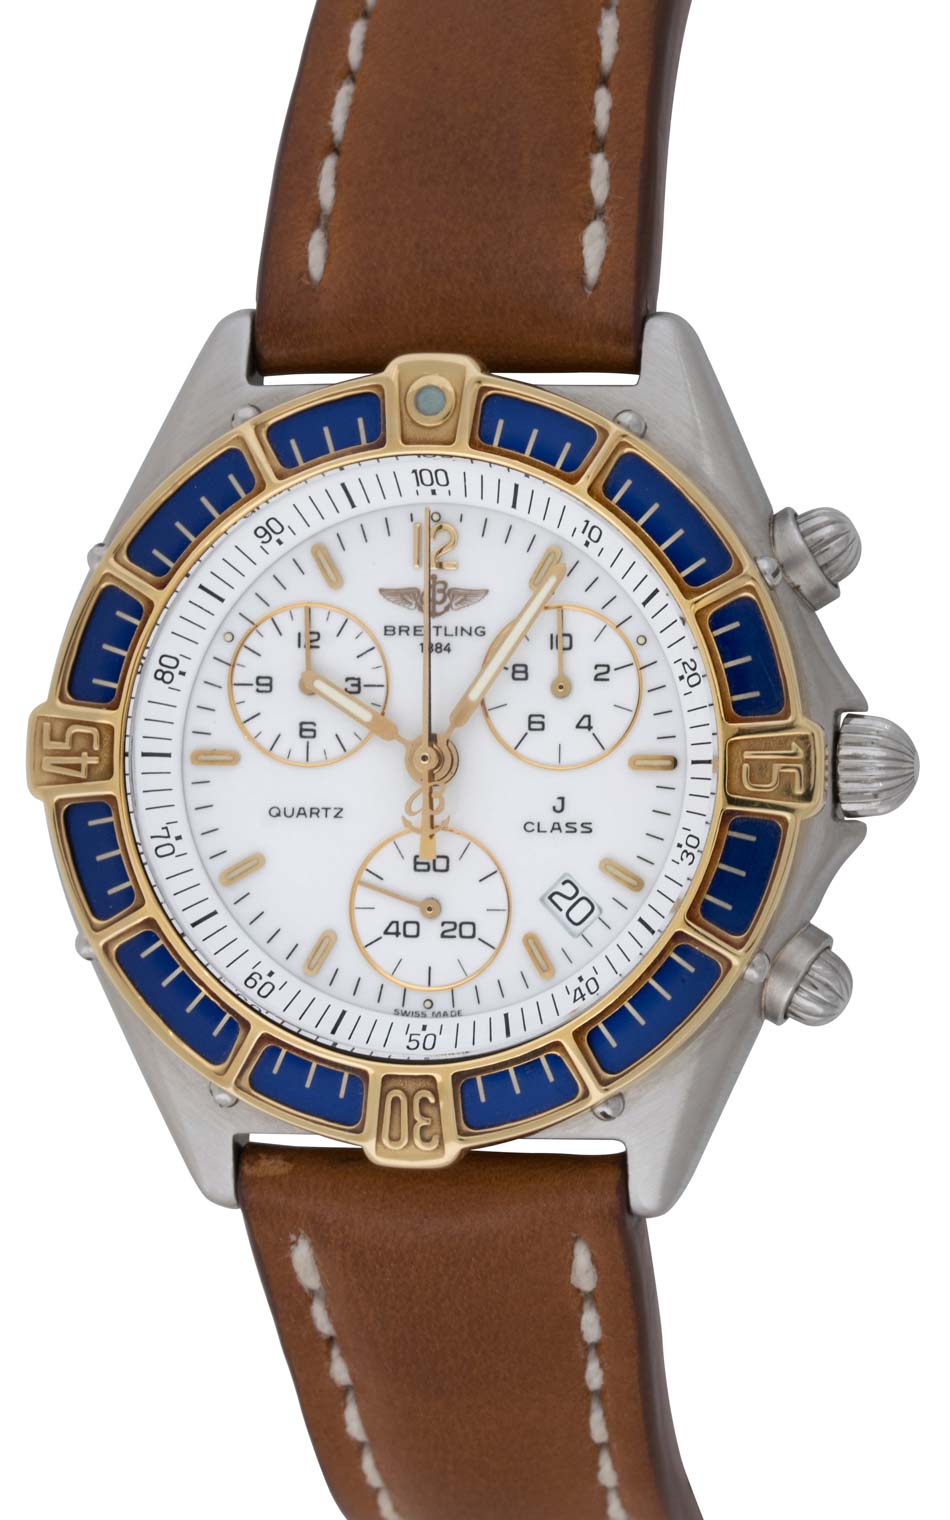 Breitling J Class Quartz Steel & 18K Gold Black Dial Ref.D53067 for $2,064  for sale from a Trusted Seller on Chrono24